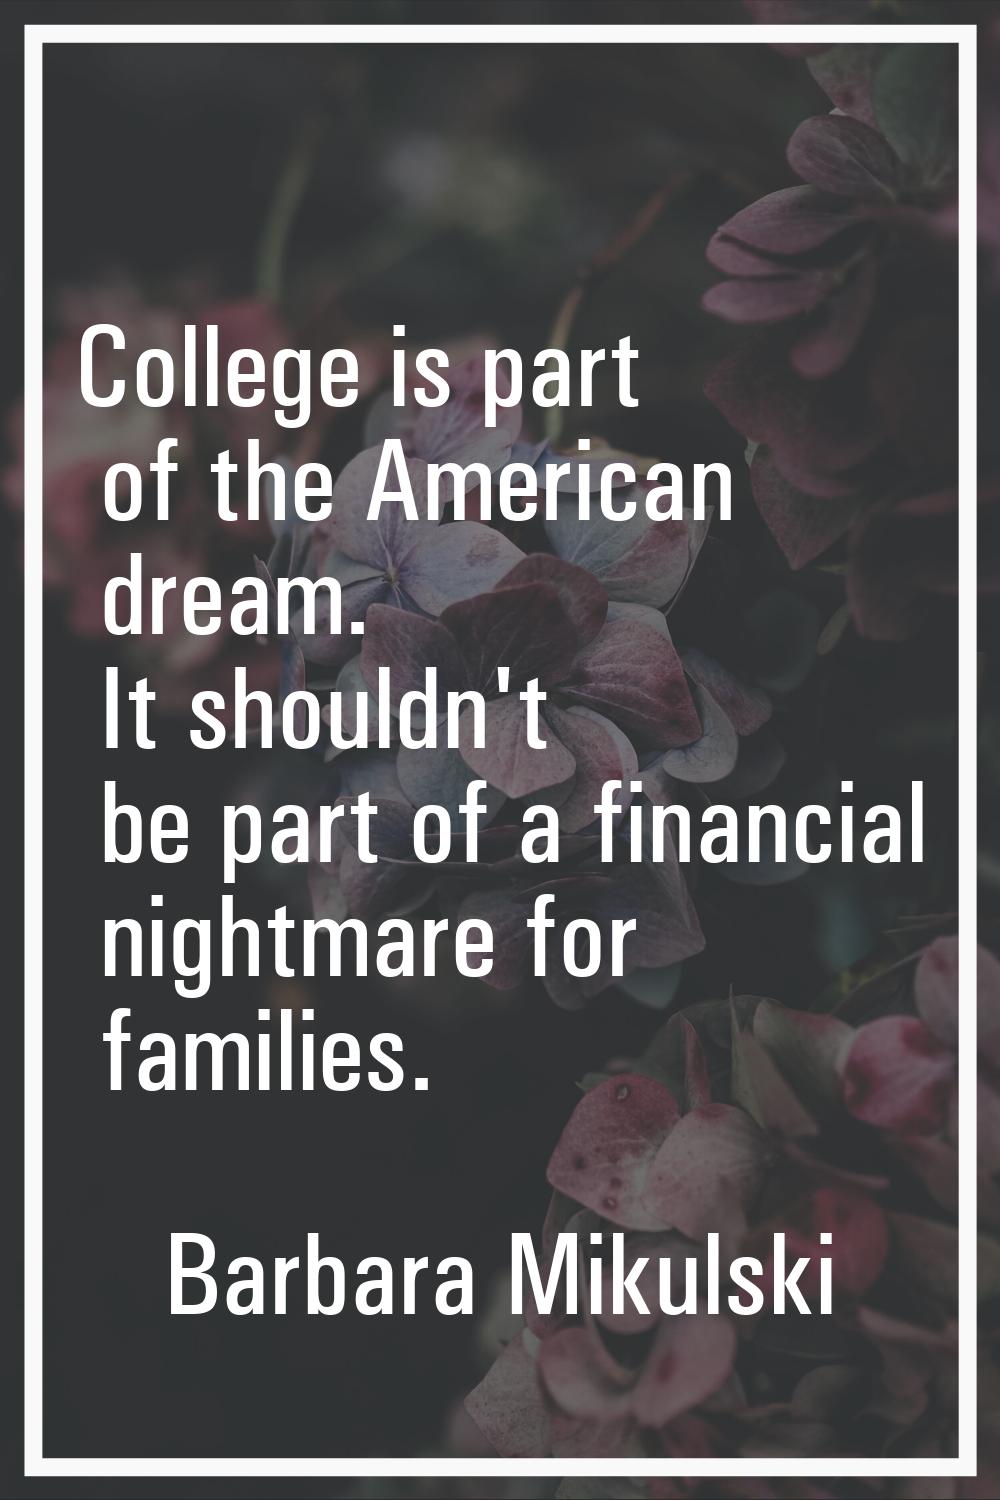 College is part of the American dream. It shouldn't be part of a financial nightmare for families.